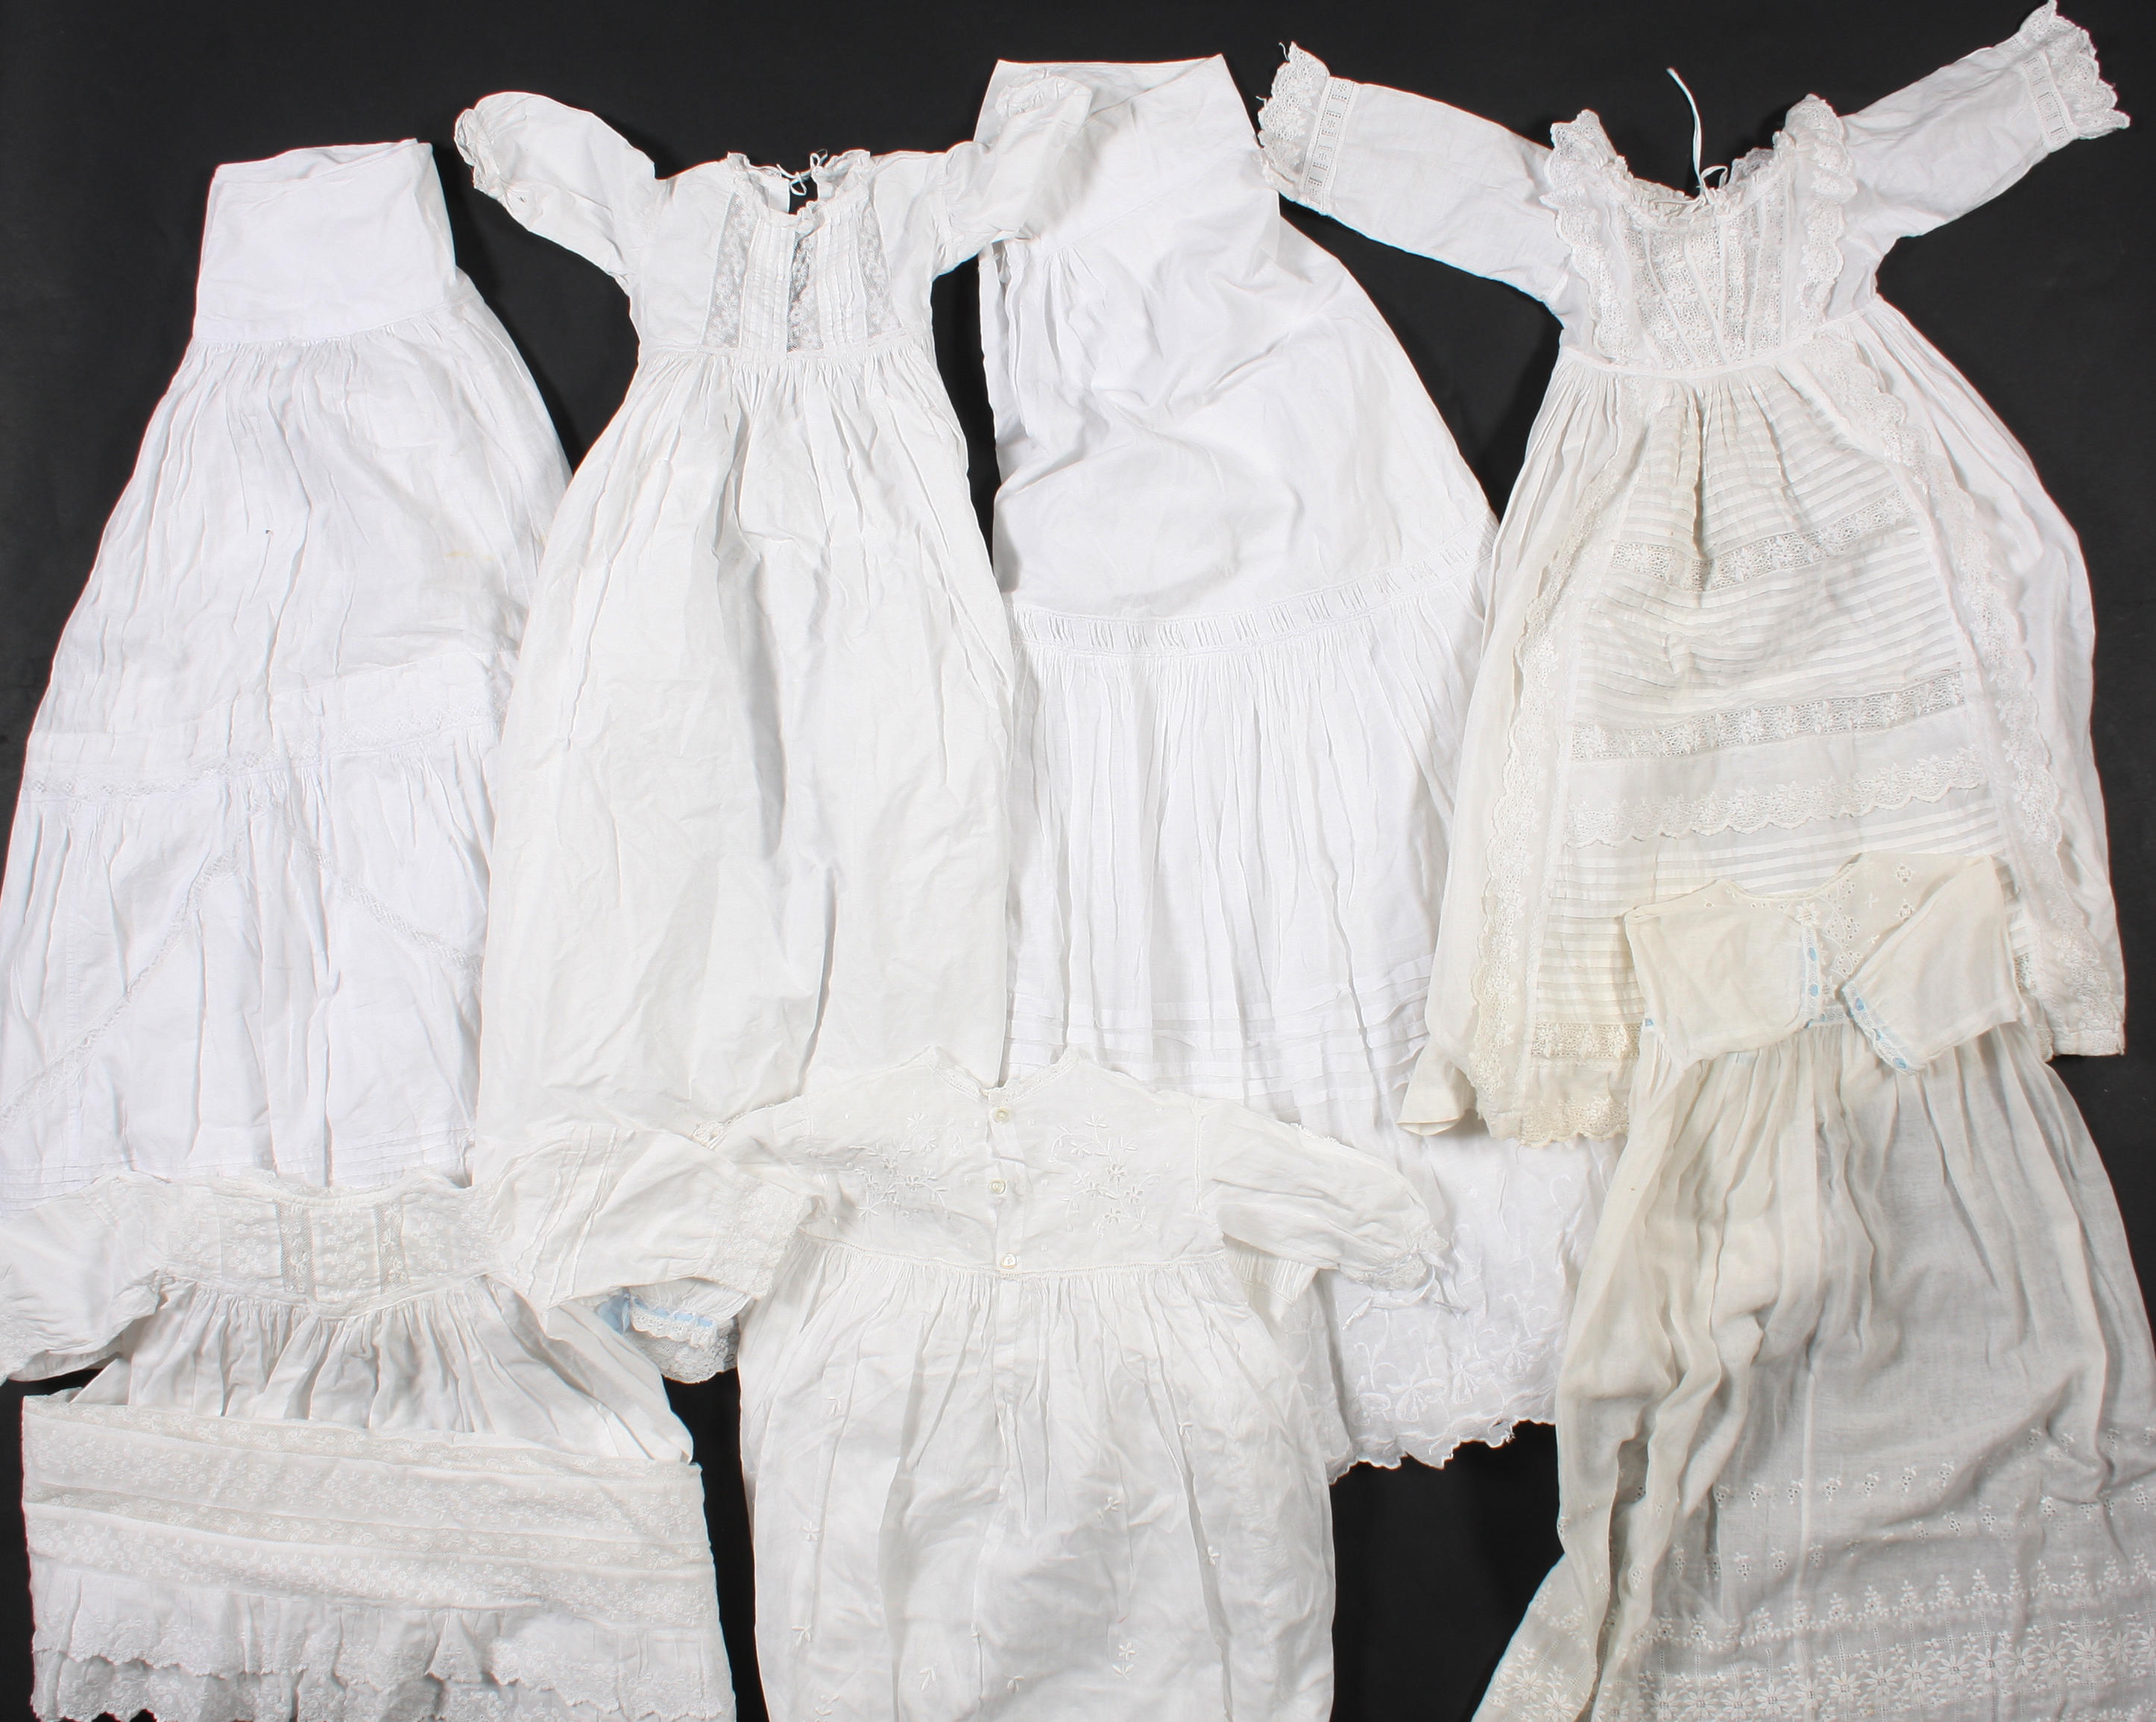 A group of 19th century whitework christening gowns and petticoats